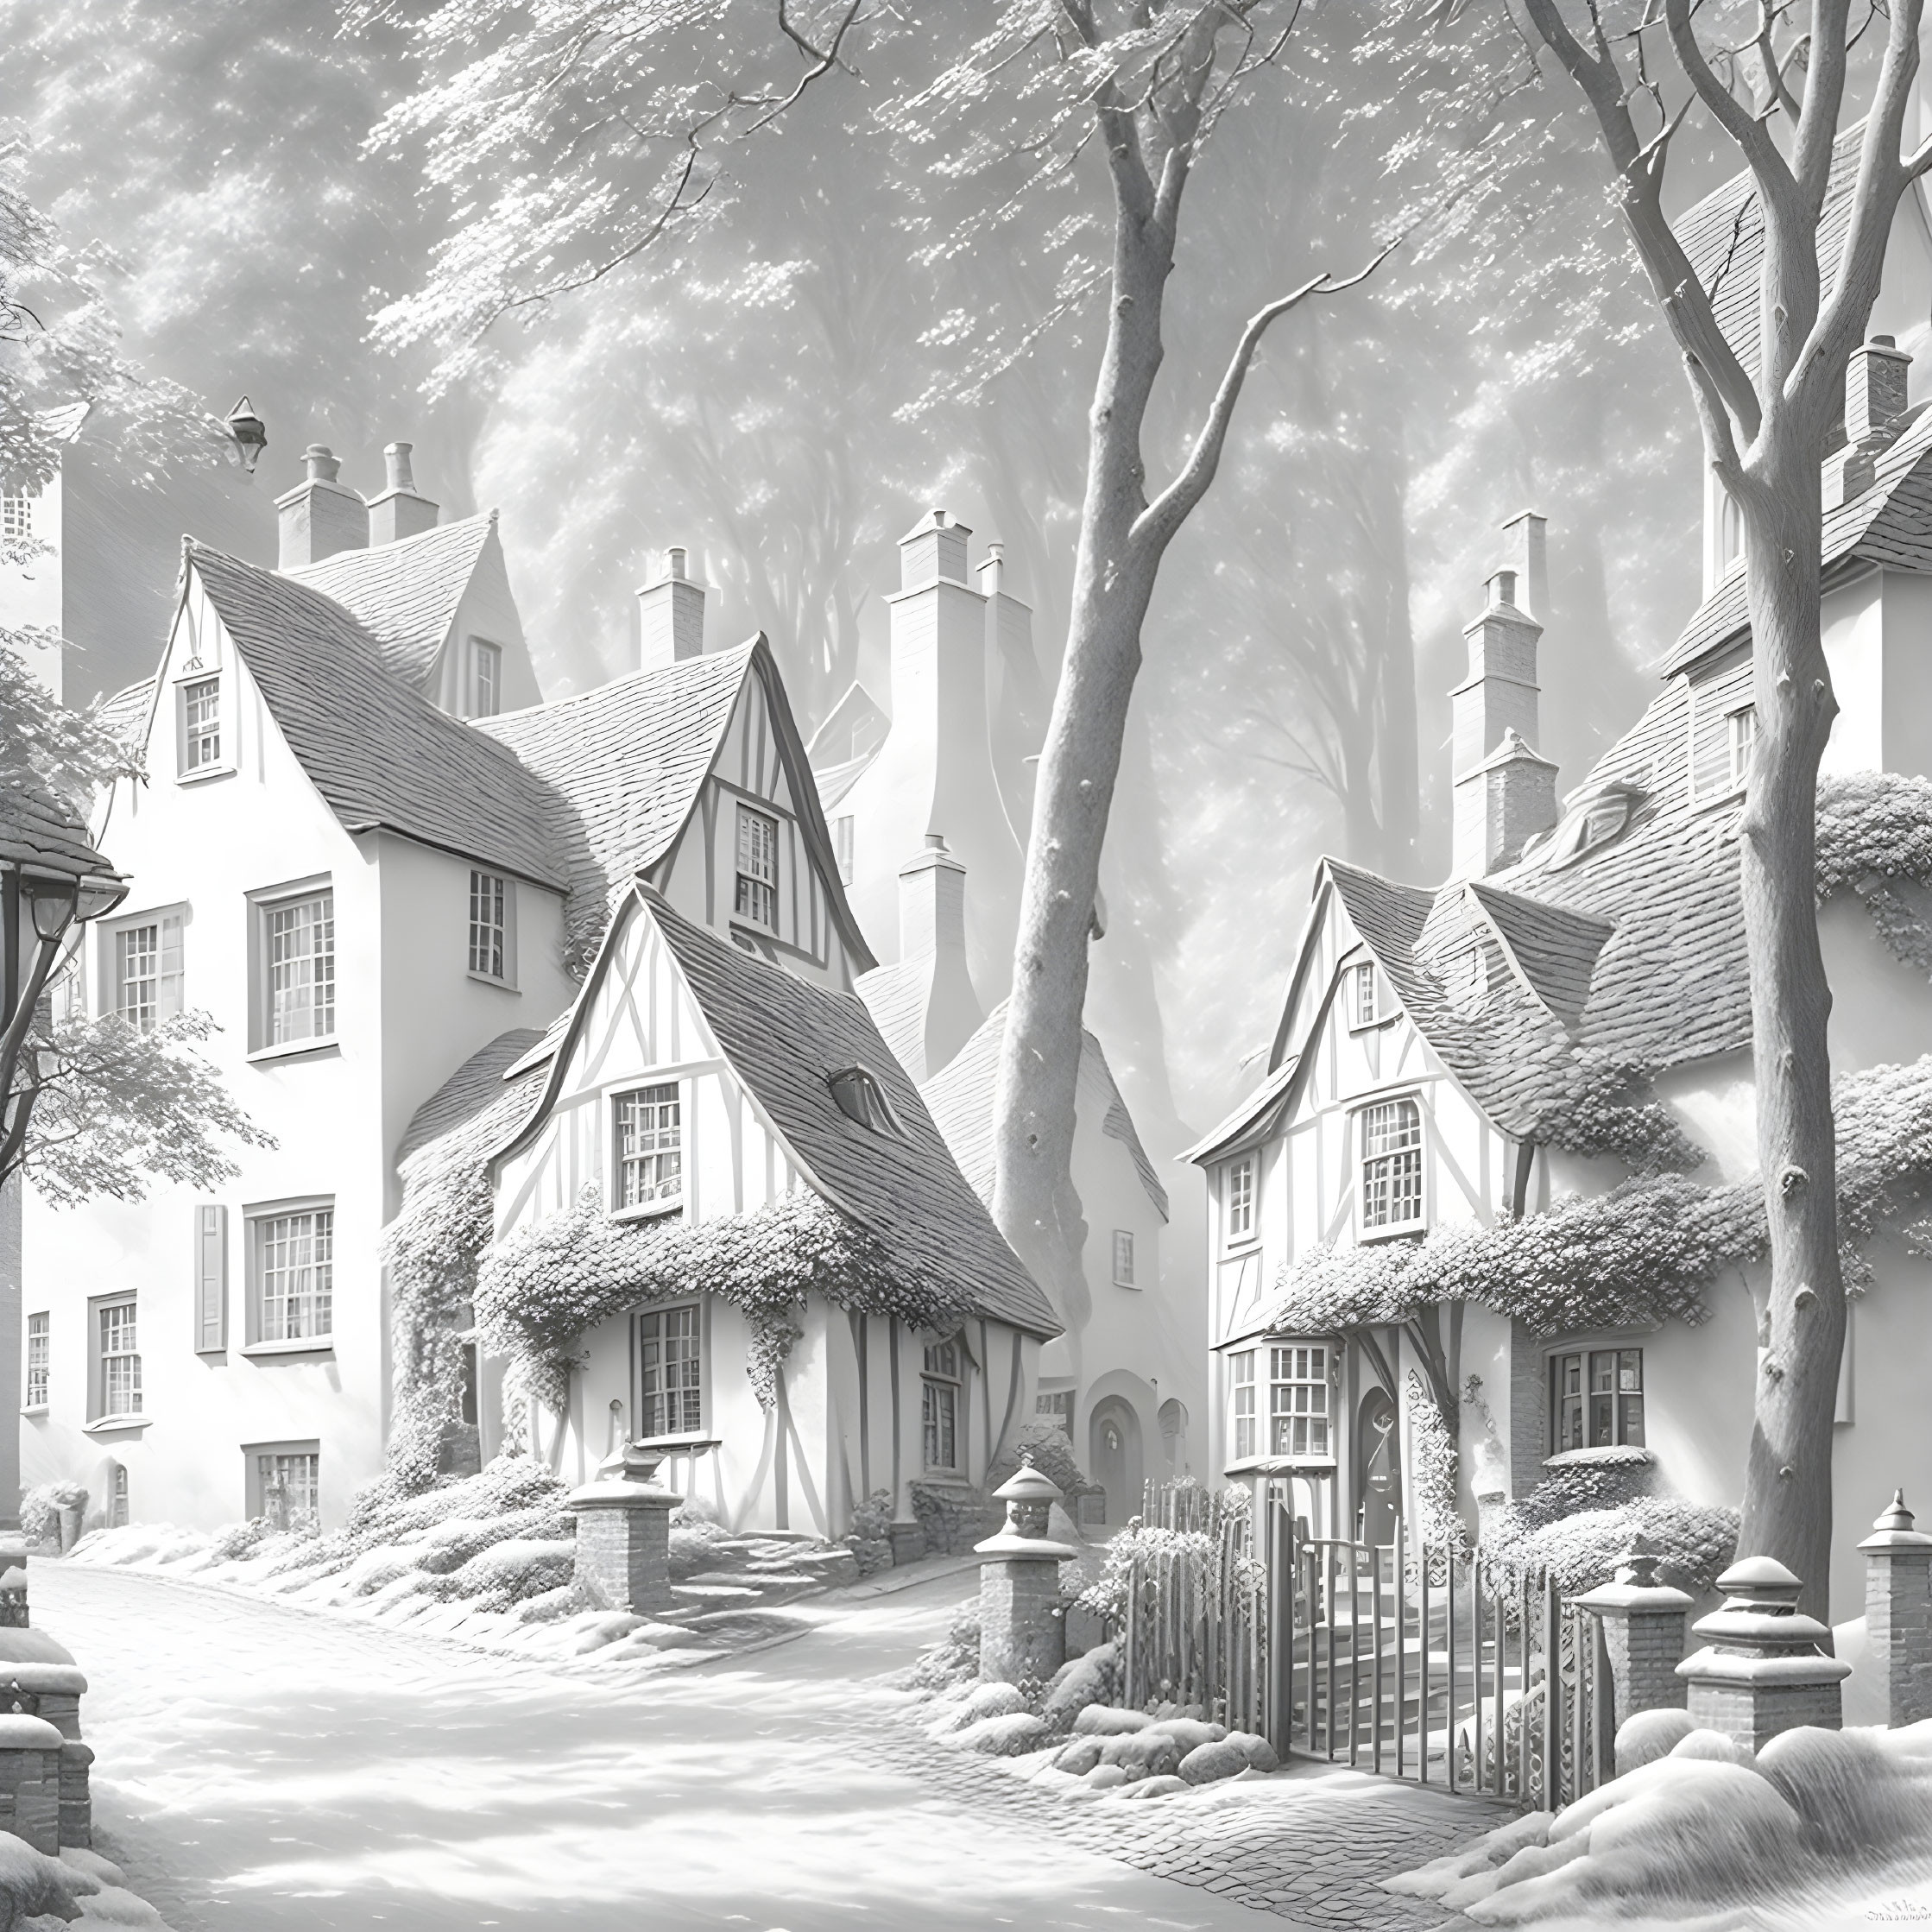 Monochrome winter village scene with snow-covered cottages and bare trees